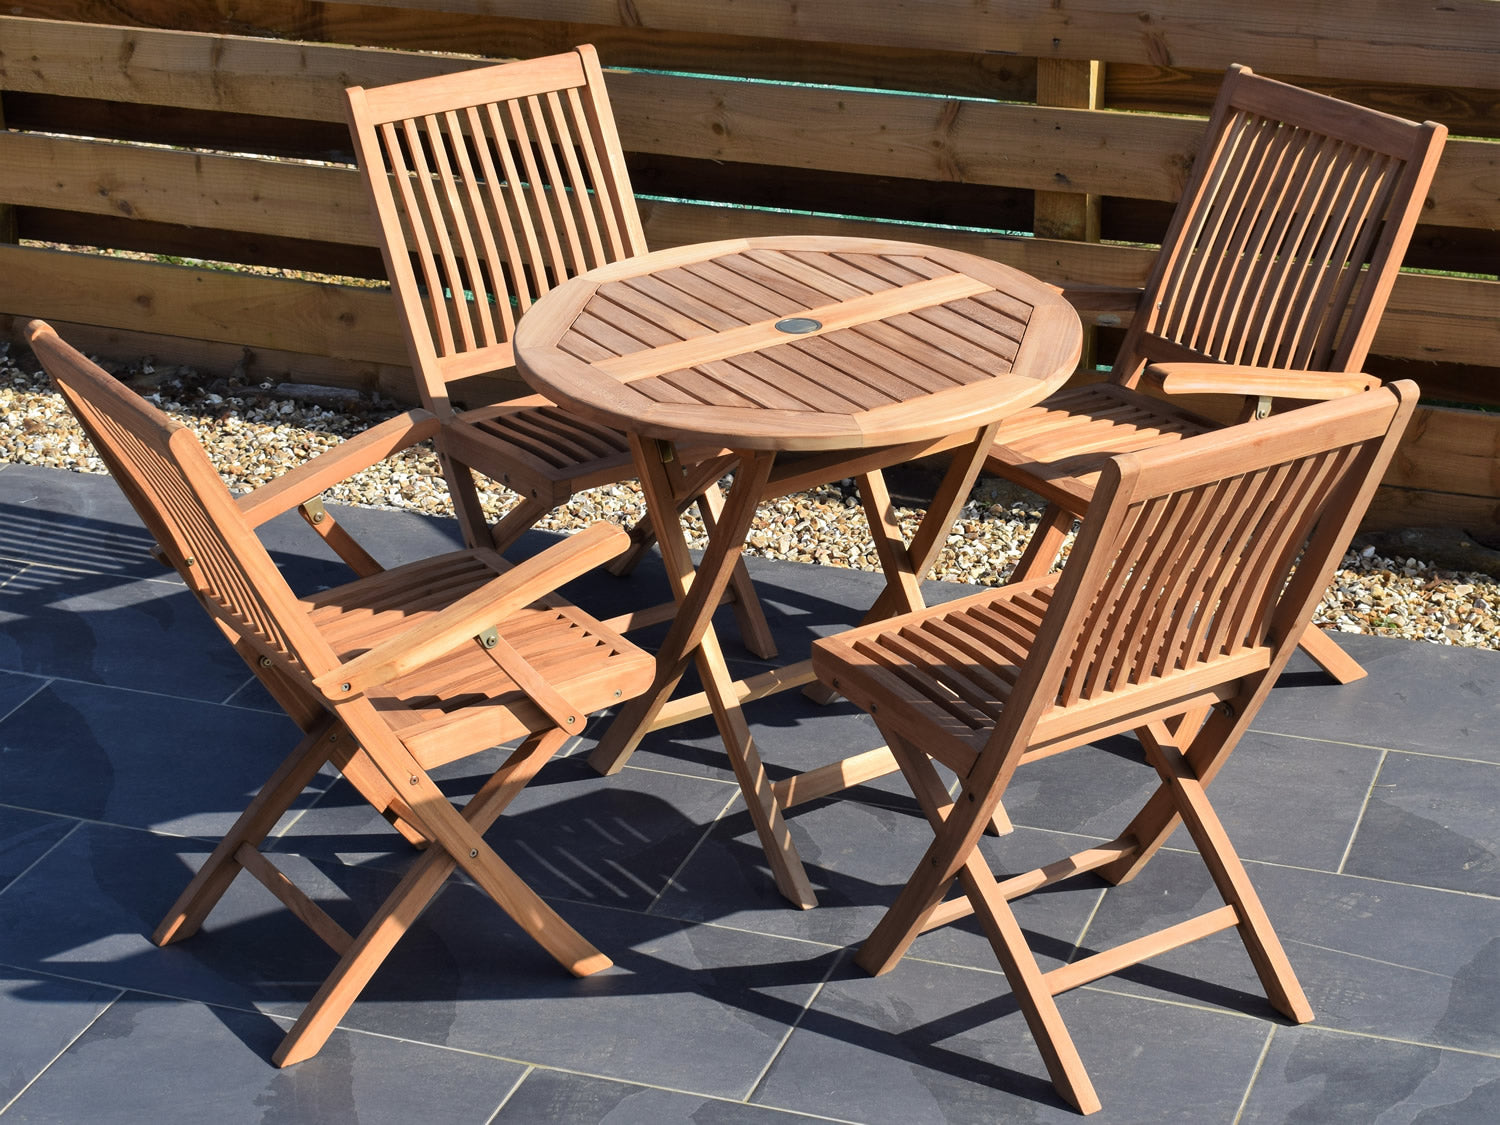 4 Seater Small Round Folding Teak Set With Folding Chairs Armchairs Patio Garden Furniture